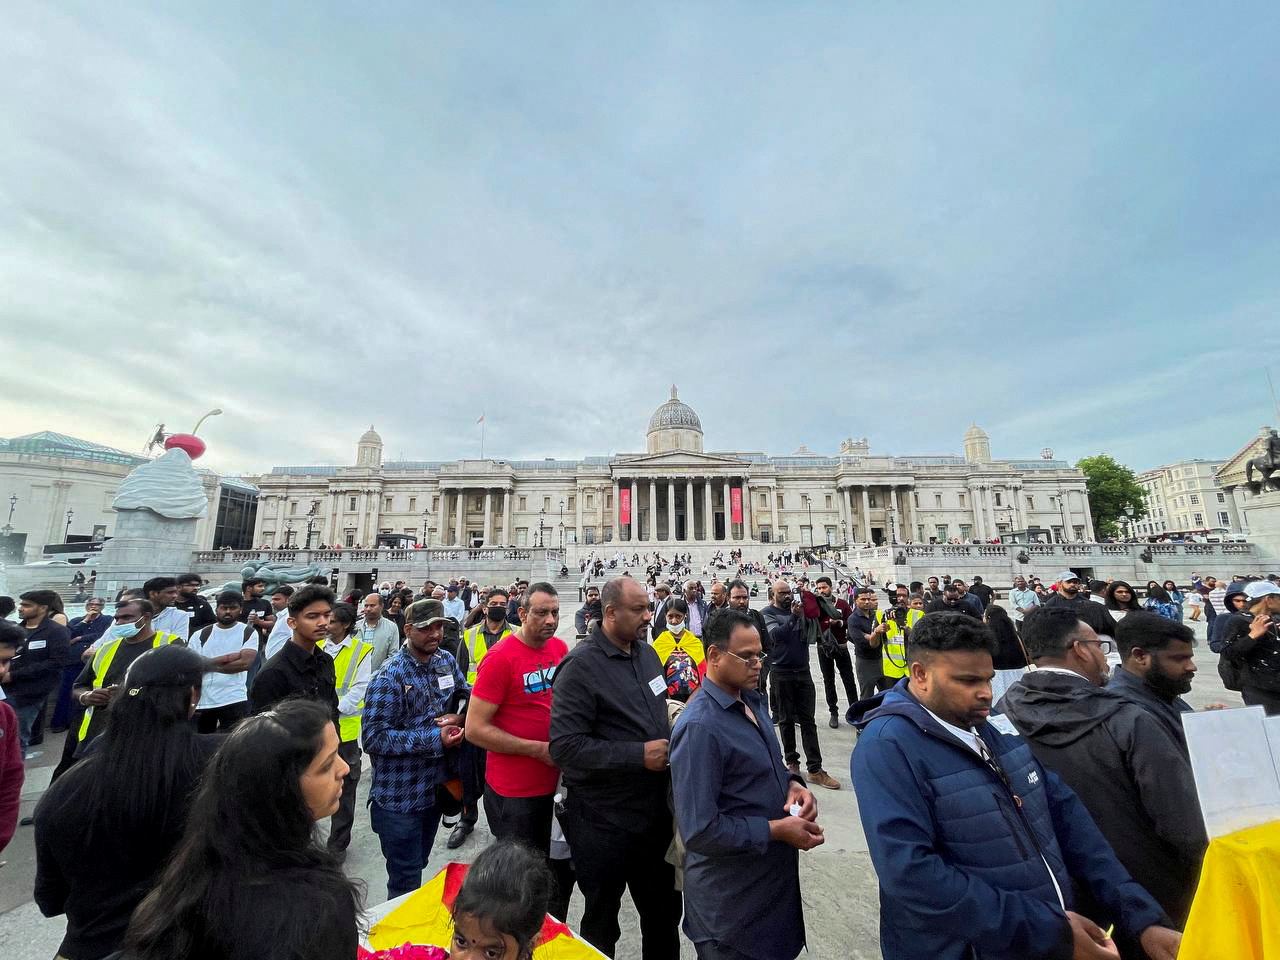 Demonstration on 13th anniversary of the end of Sri Lankan civil war, in London